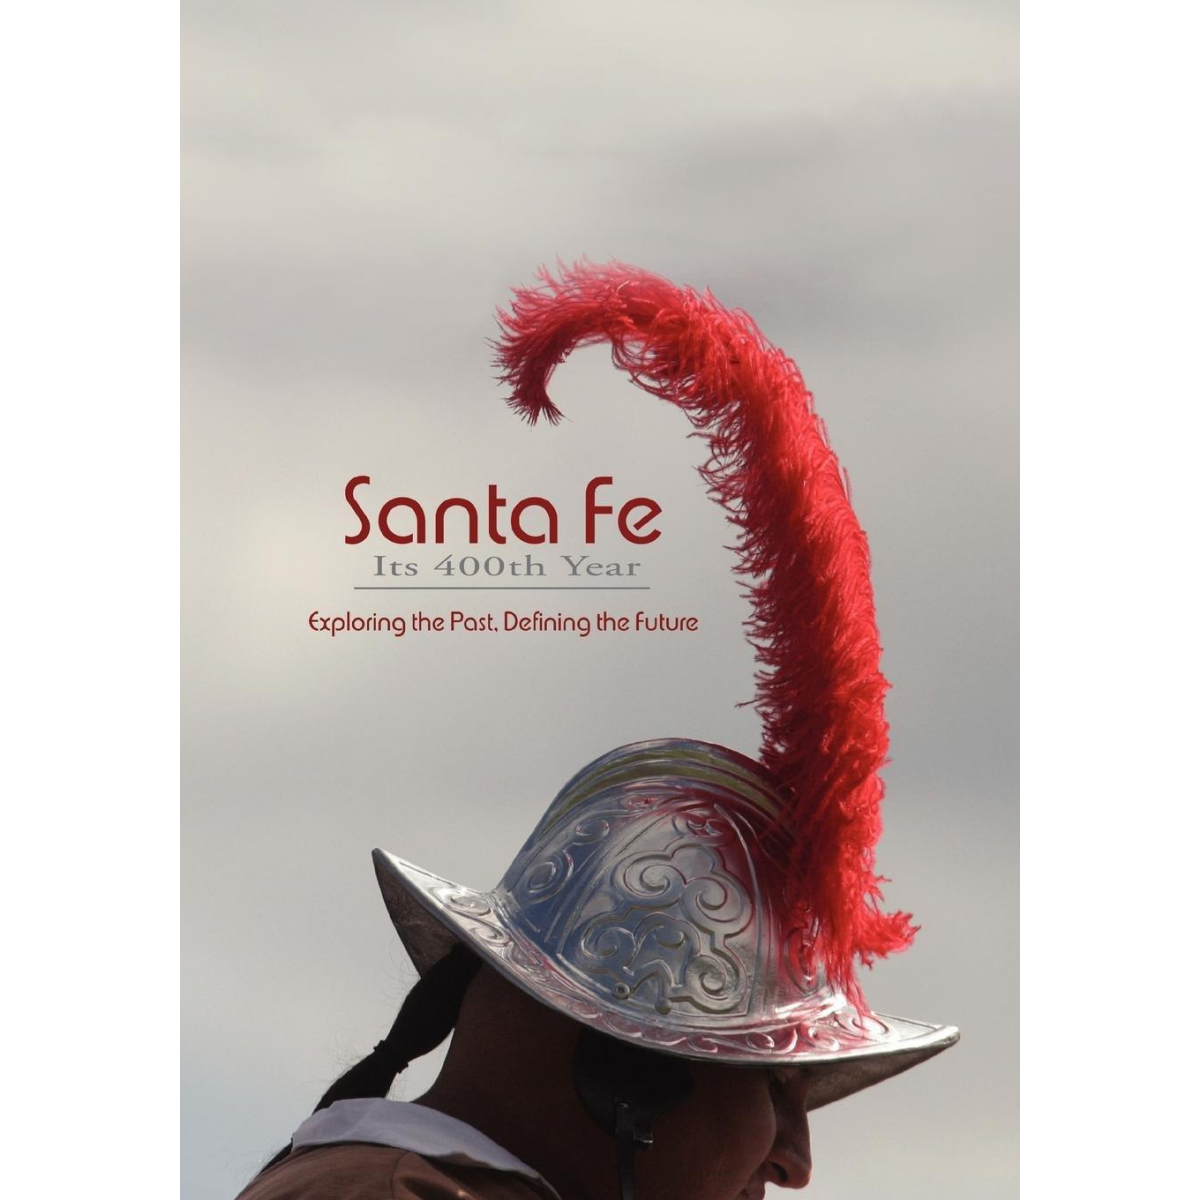 Santa Fe Its 400th Year: Exploring the Past, Defining the Future